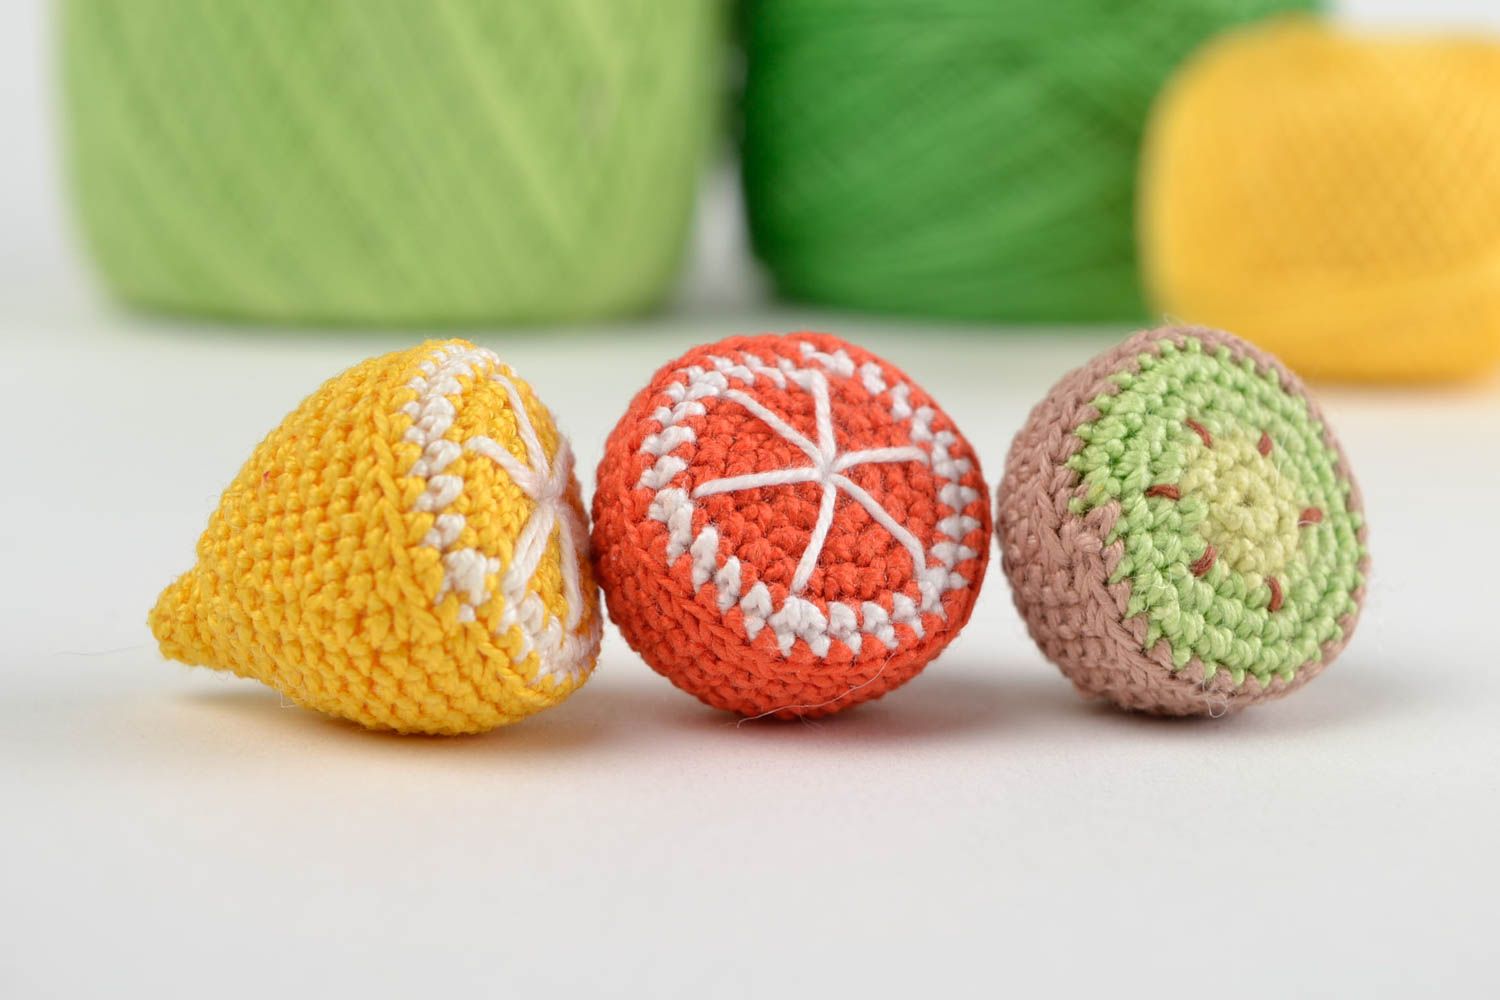 Handmade toy crocheted toy unusual toys for baby toy fruit gift ideas photo 1